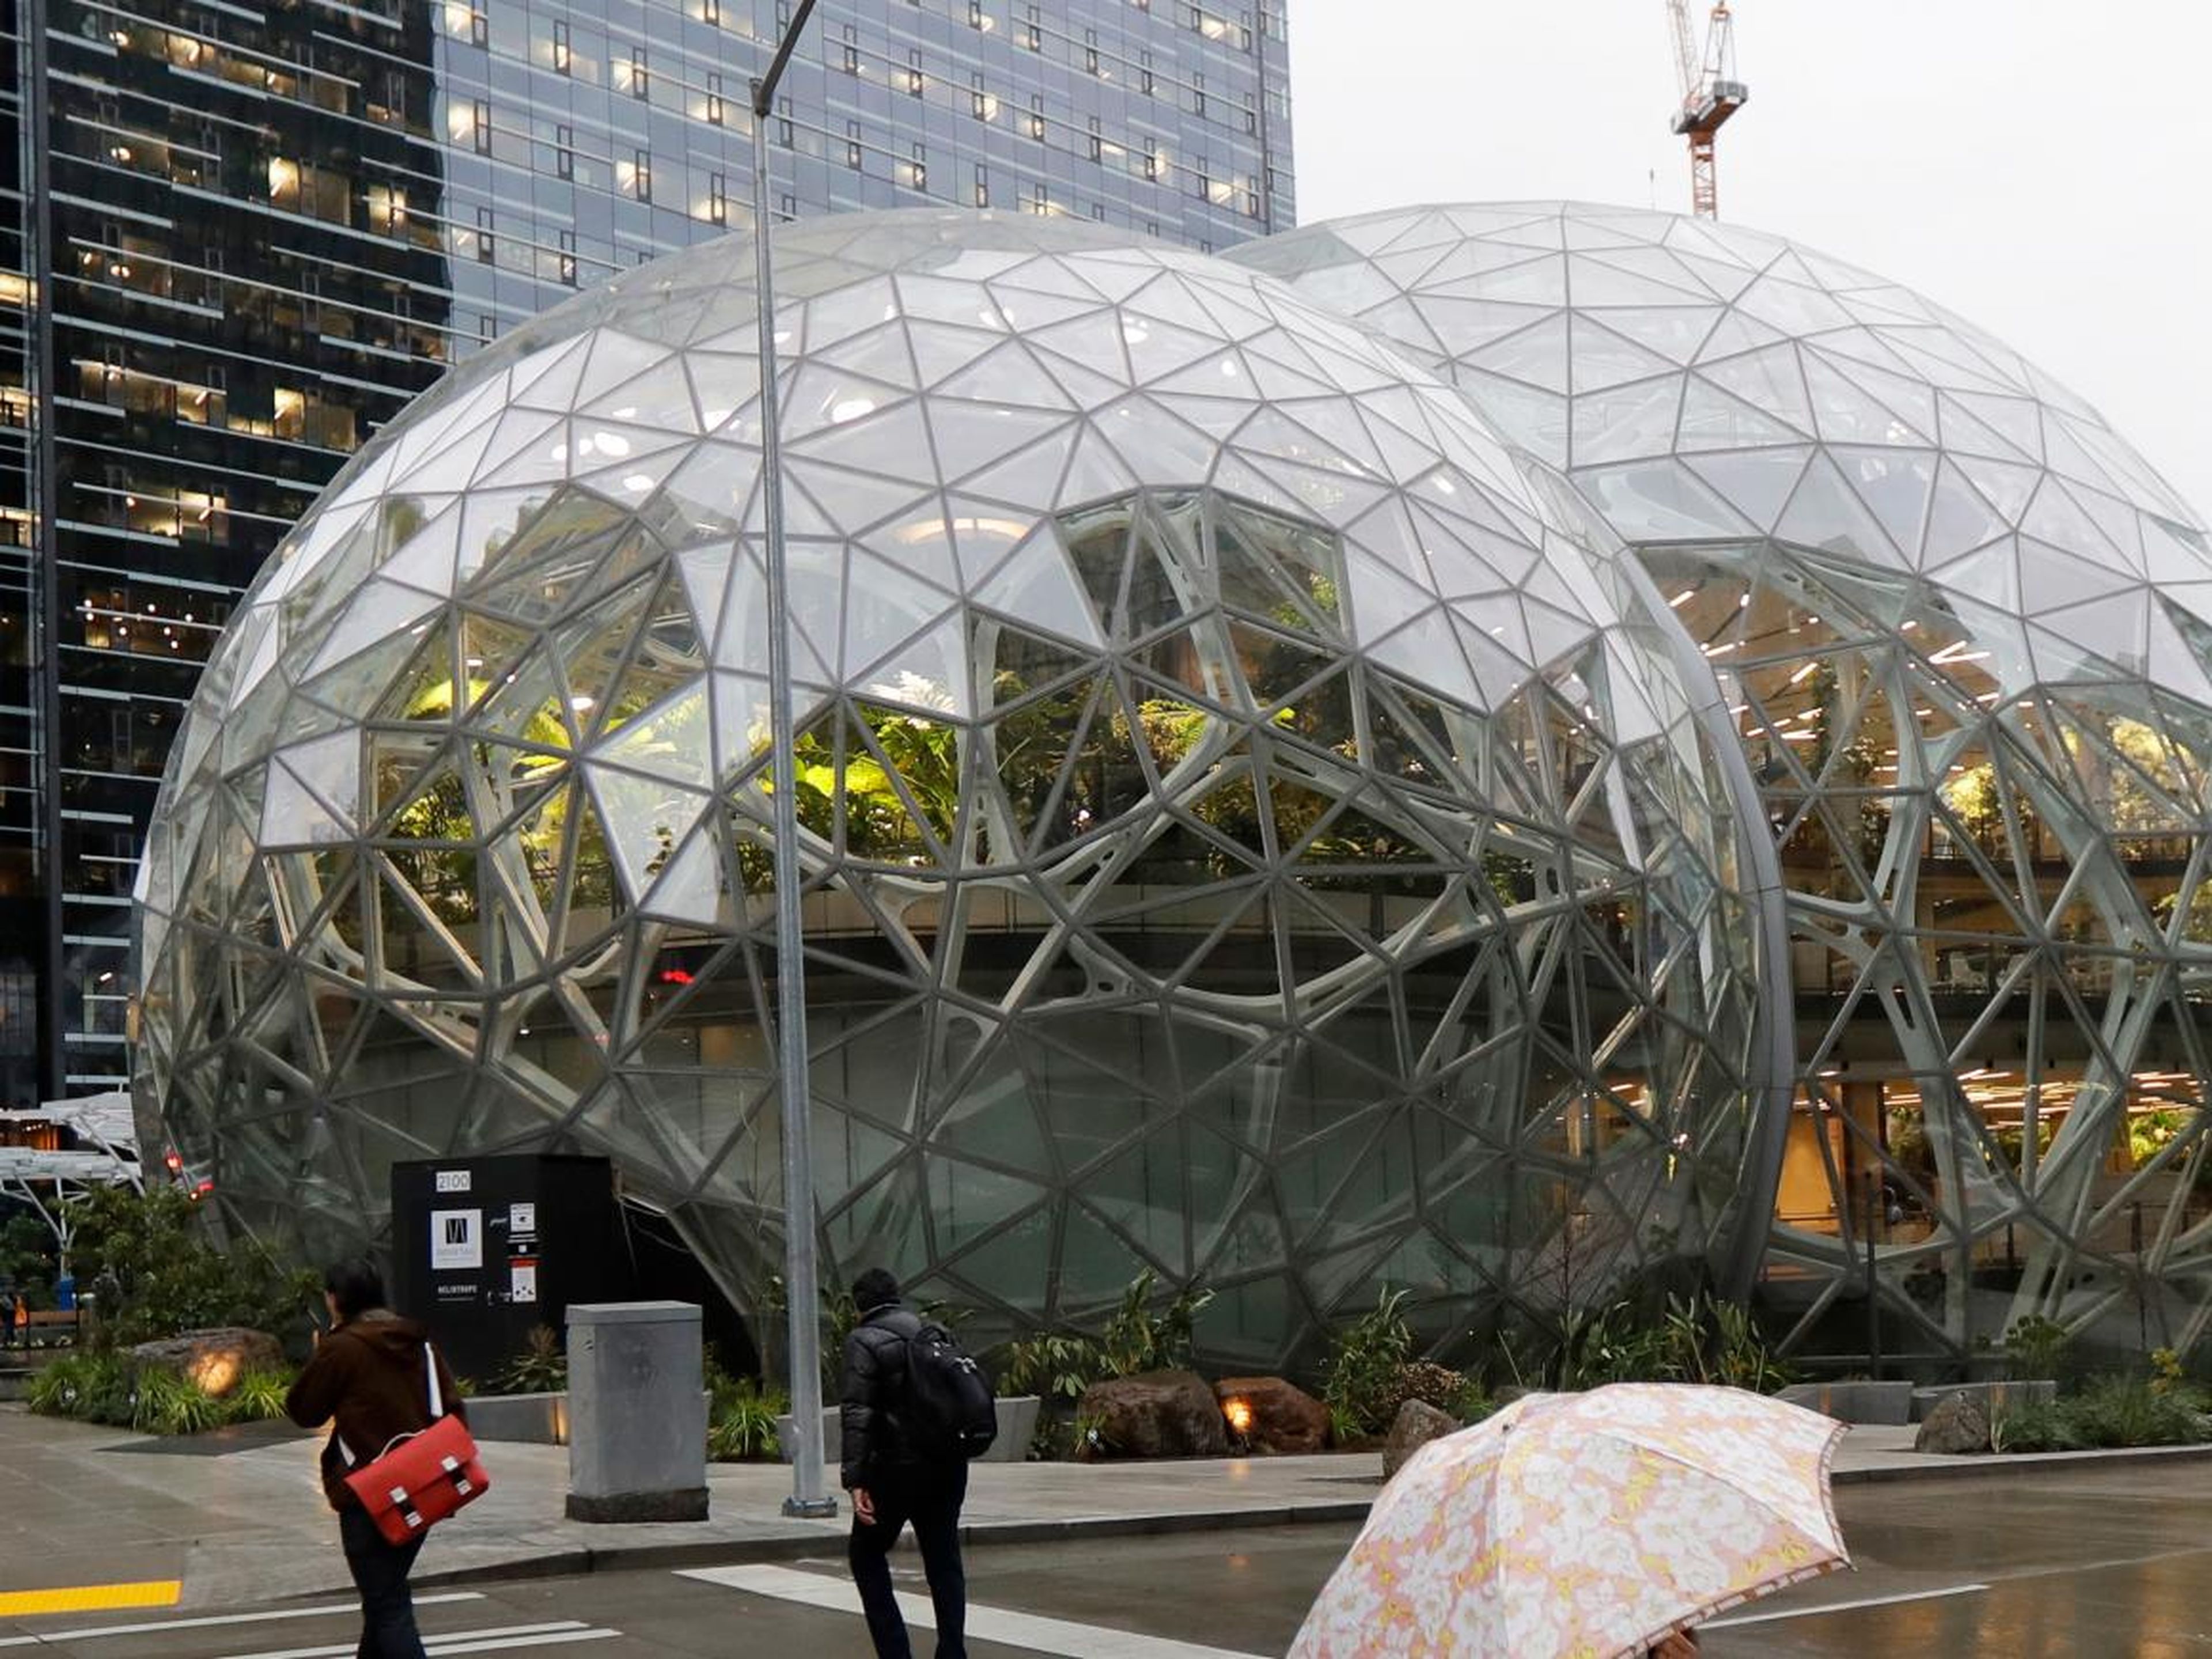 It doesn't hurt that this first Amazon Go store is based in Amazon's Day 1 skyscraper headquarters, next to the Amazon Spheres.